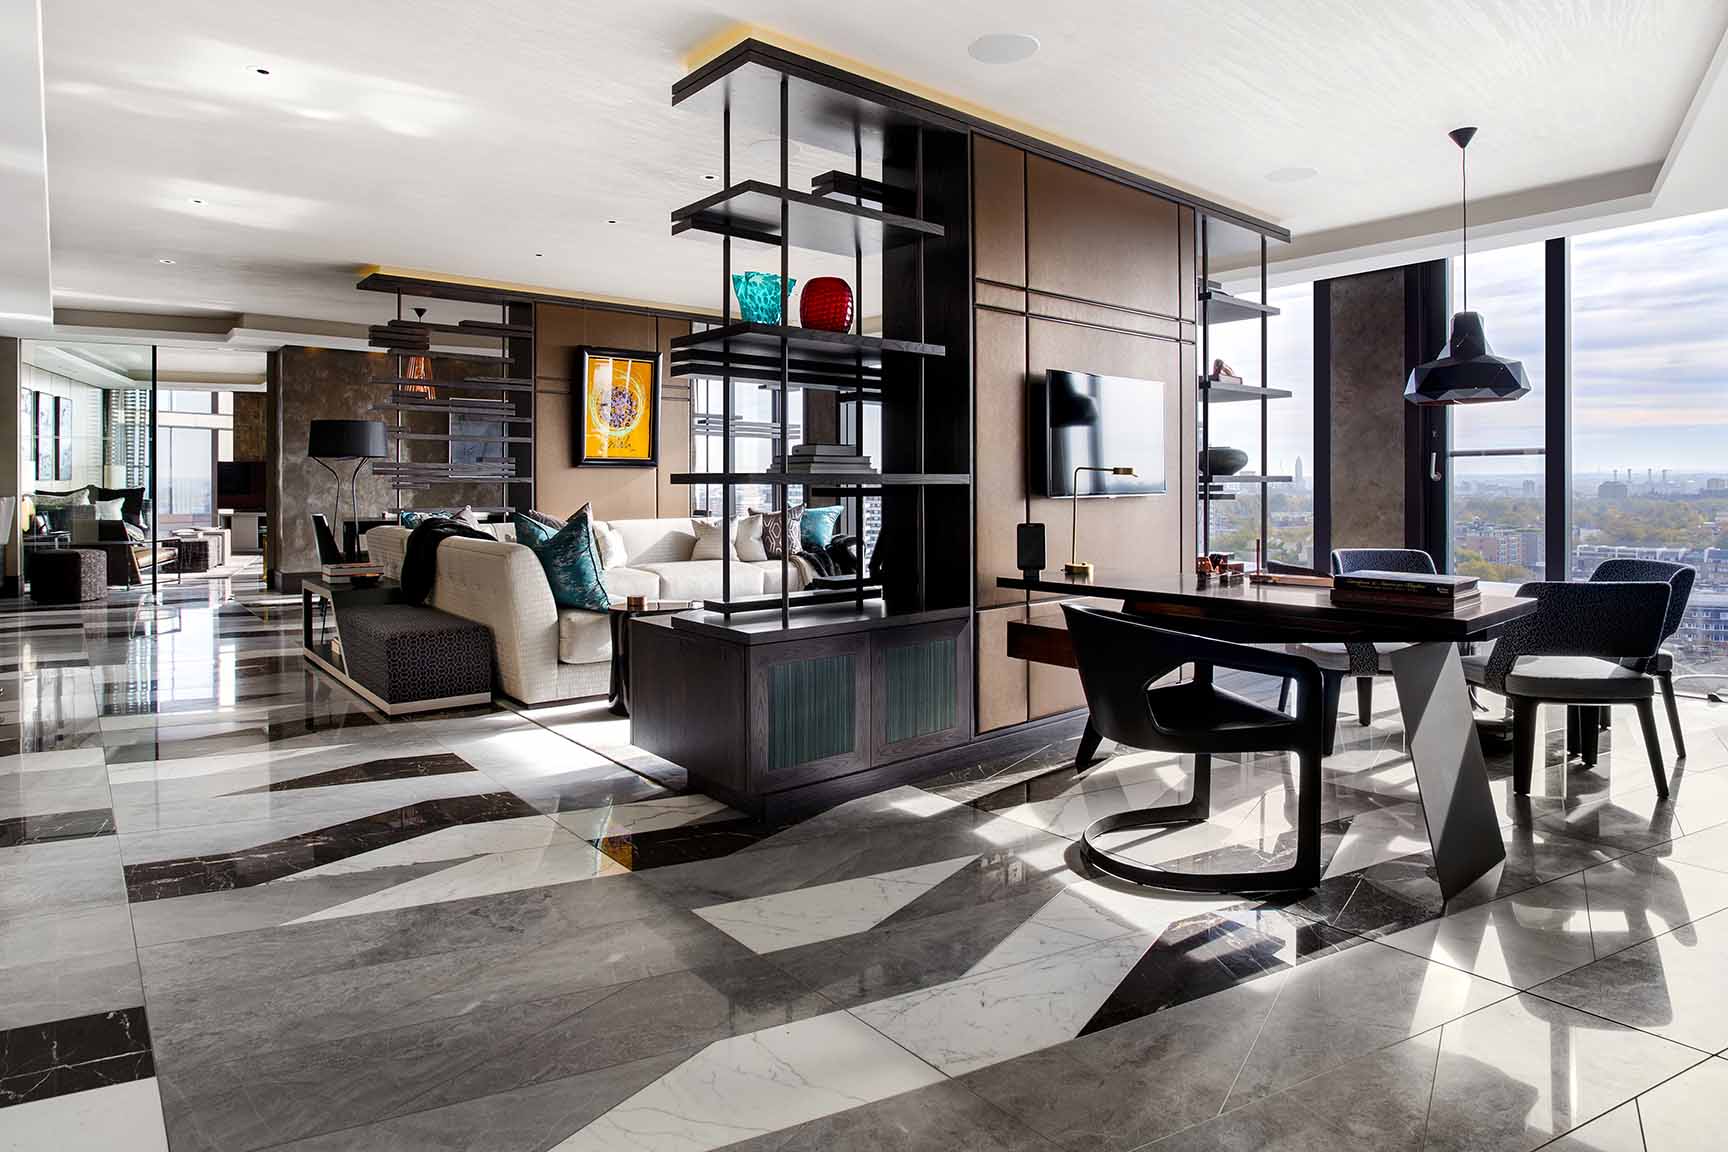 Luxurious penthouse entertainment space with bespoke marble tiled floor and small study